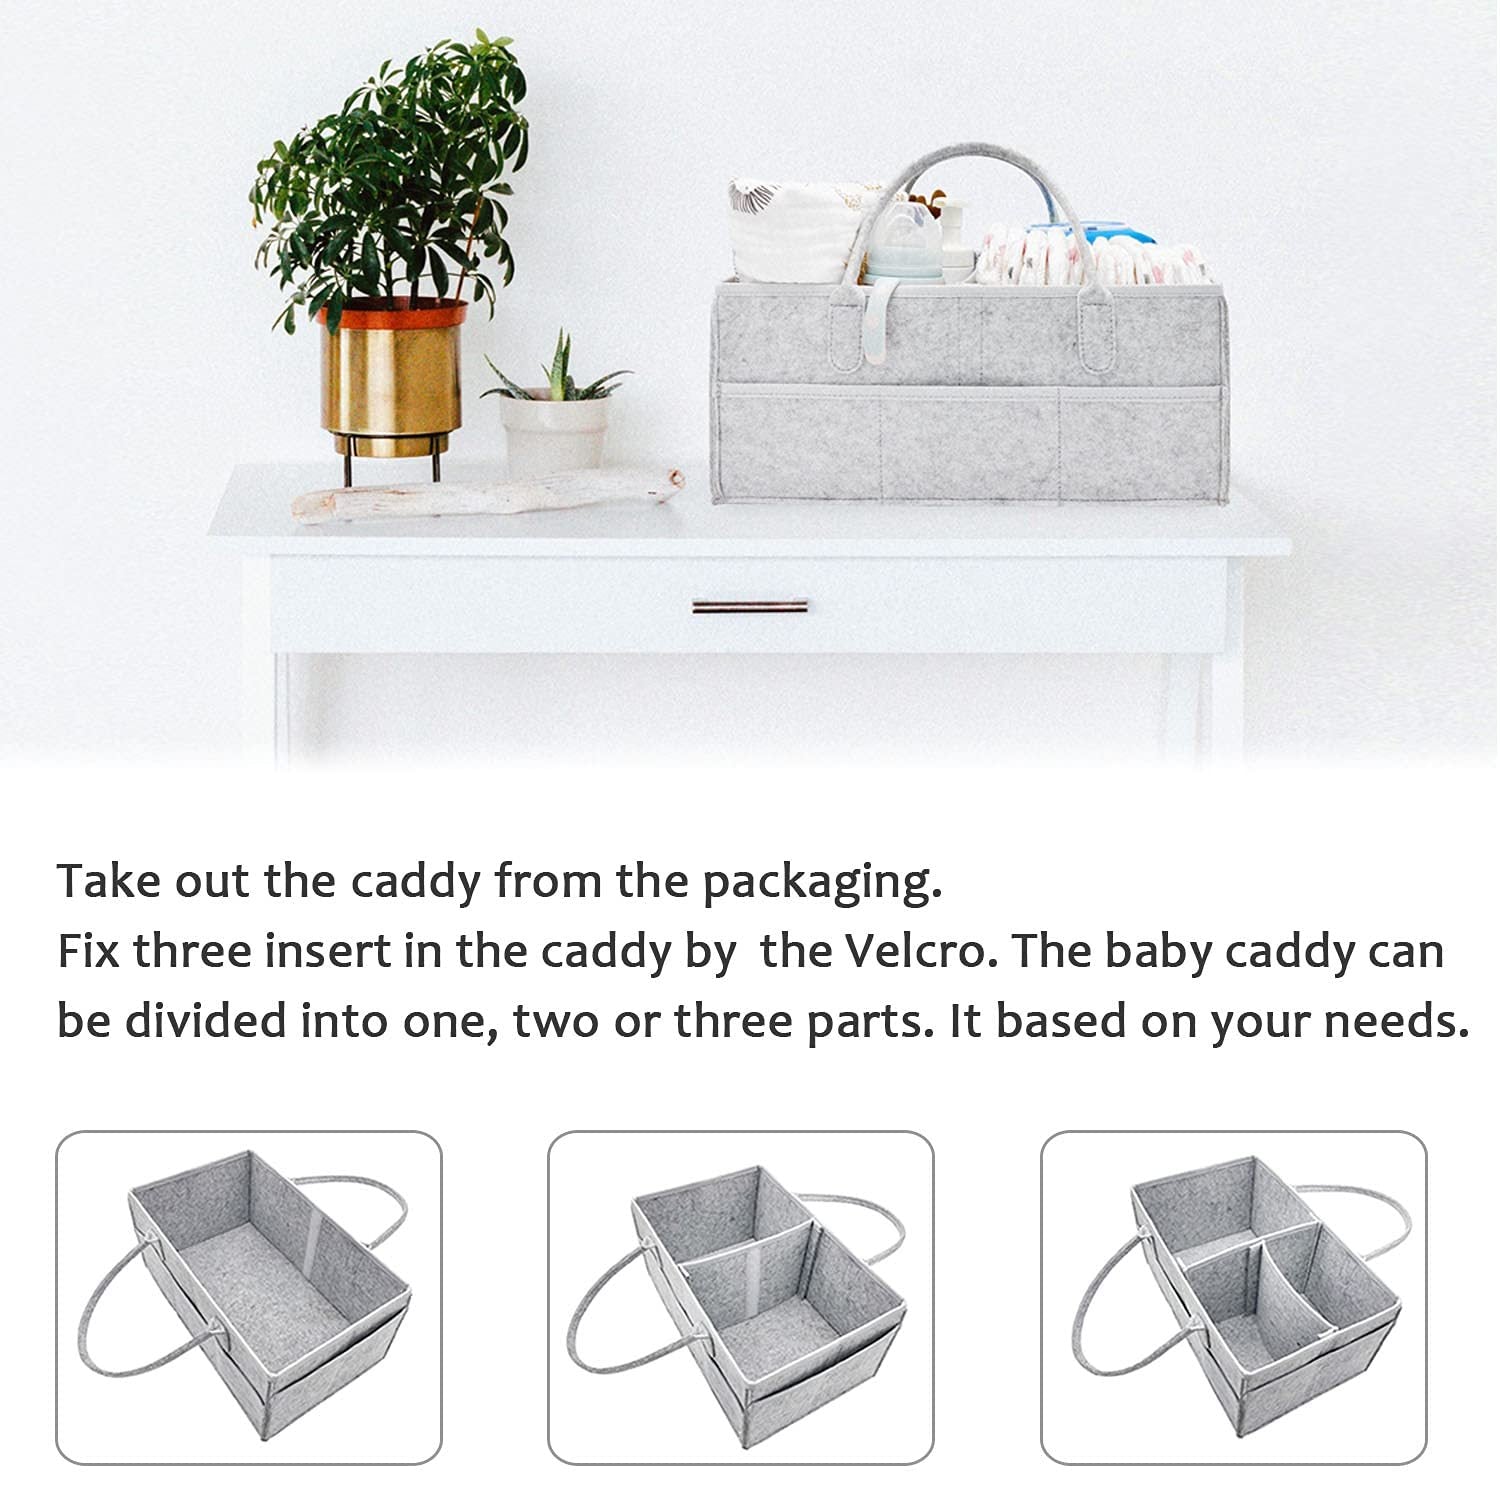 NXY Baby Diaper Caddy - Nursery Storage Bin and Car Organizer for Diapers and Baby Wipes